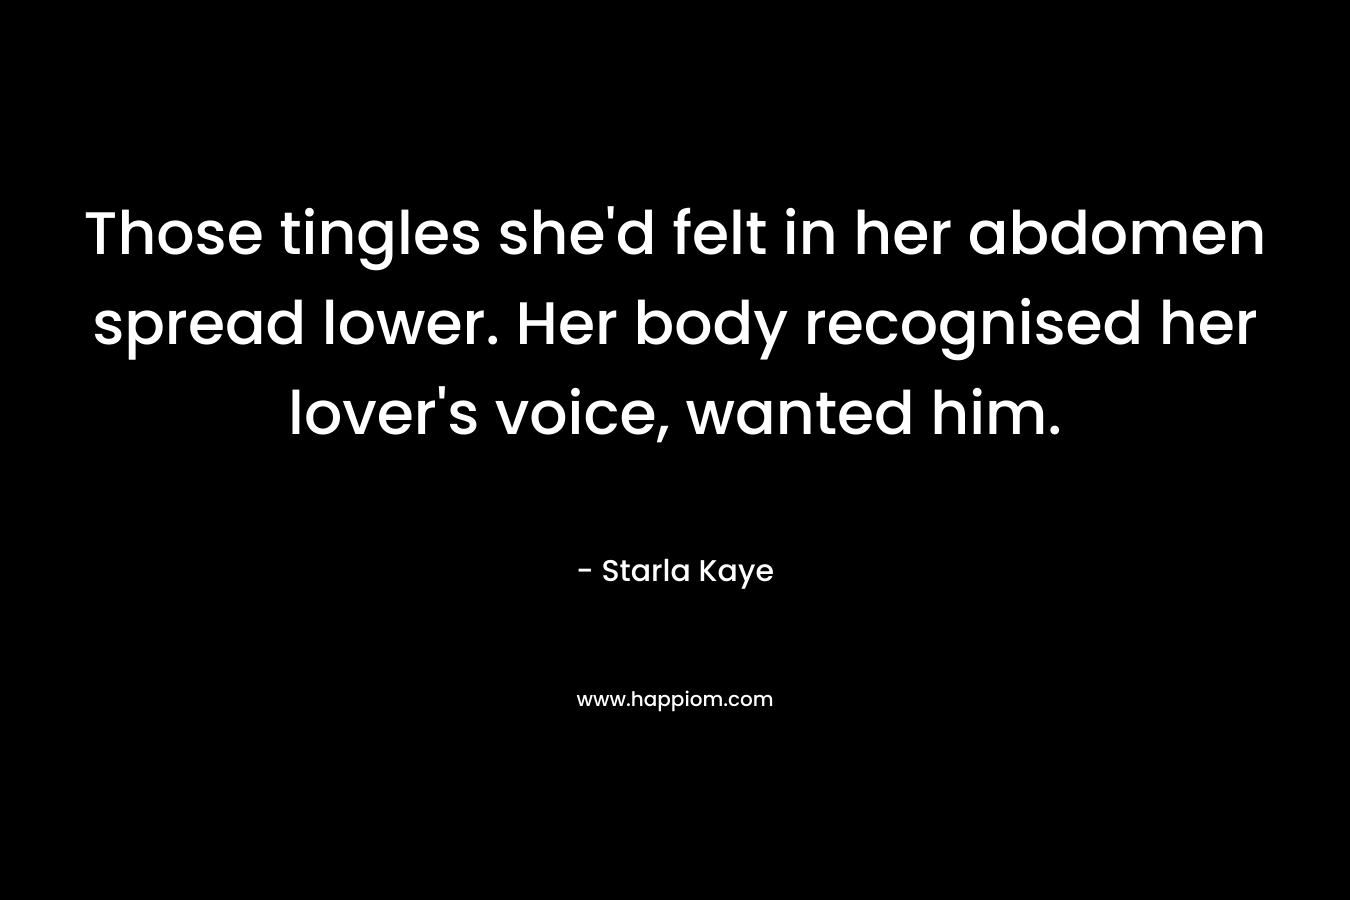 Those tingles she’d felt in her abdomen spread lower. Her body recognised her lover’s voice, wanted him. – Starla Kaye